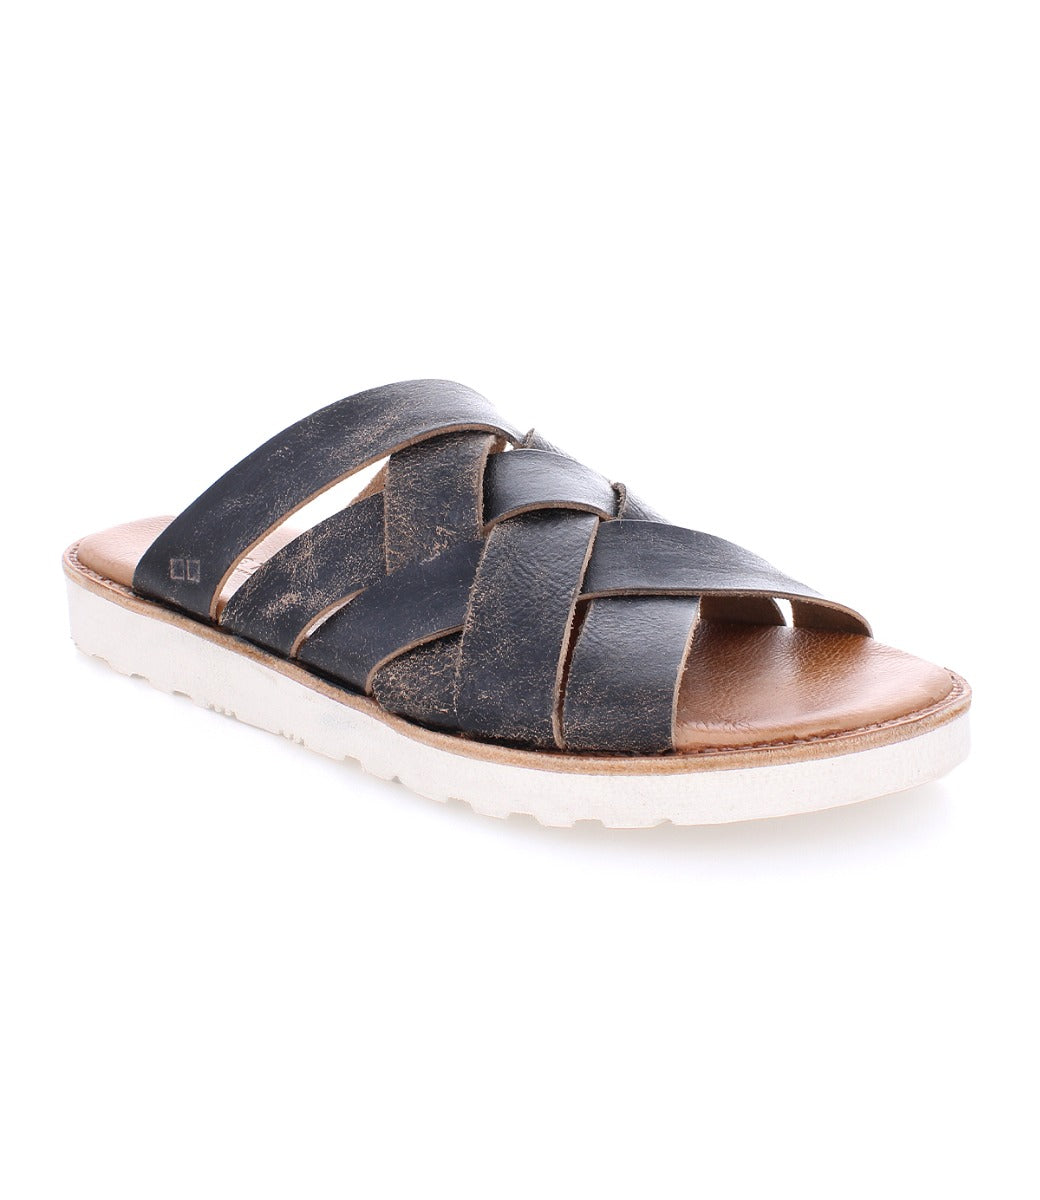 A pair of Abraham Light sandals with white soles by Bed Stu.